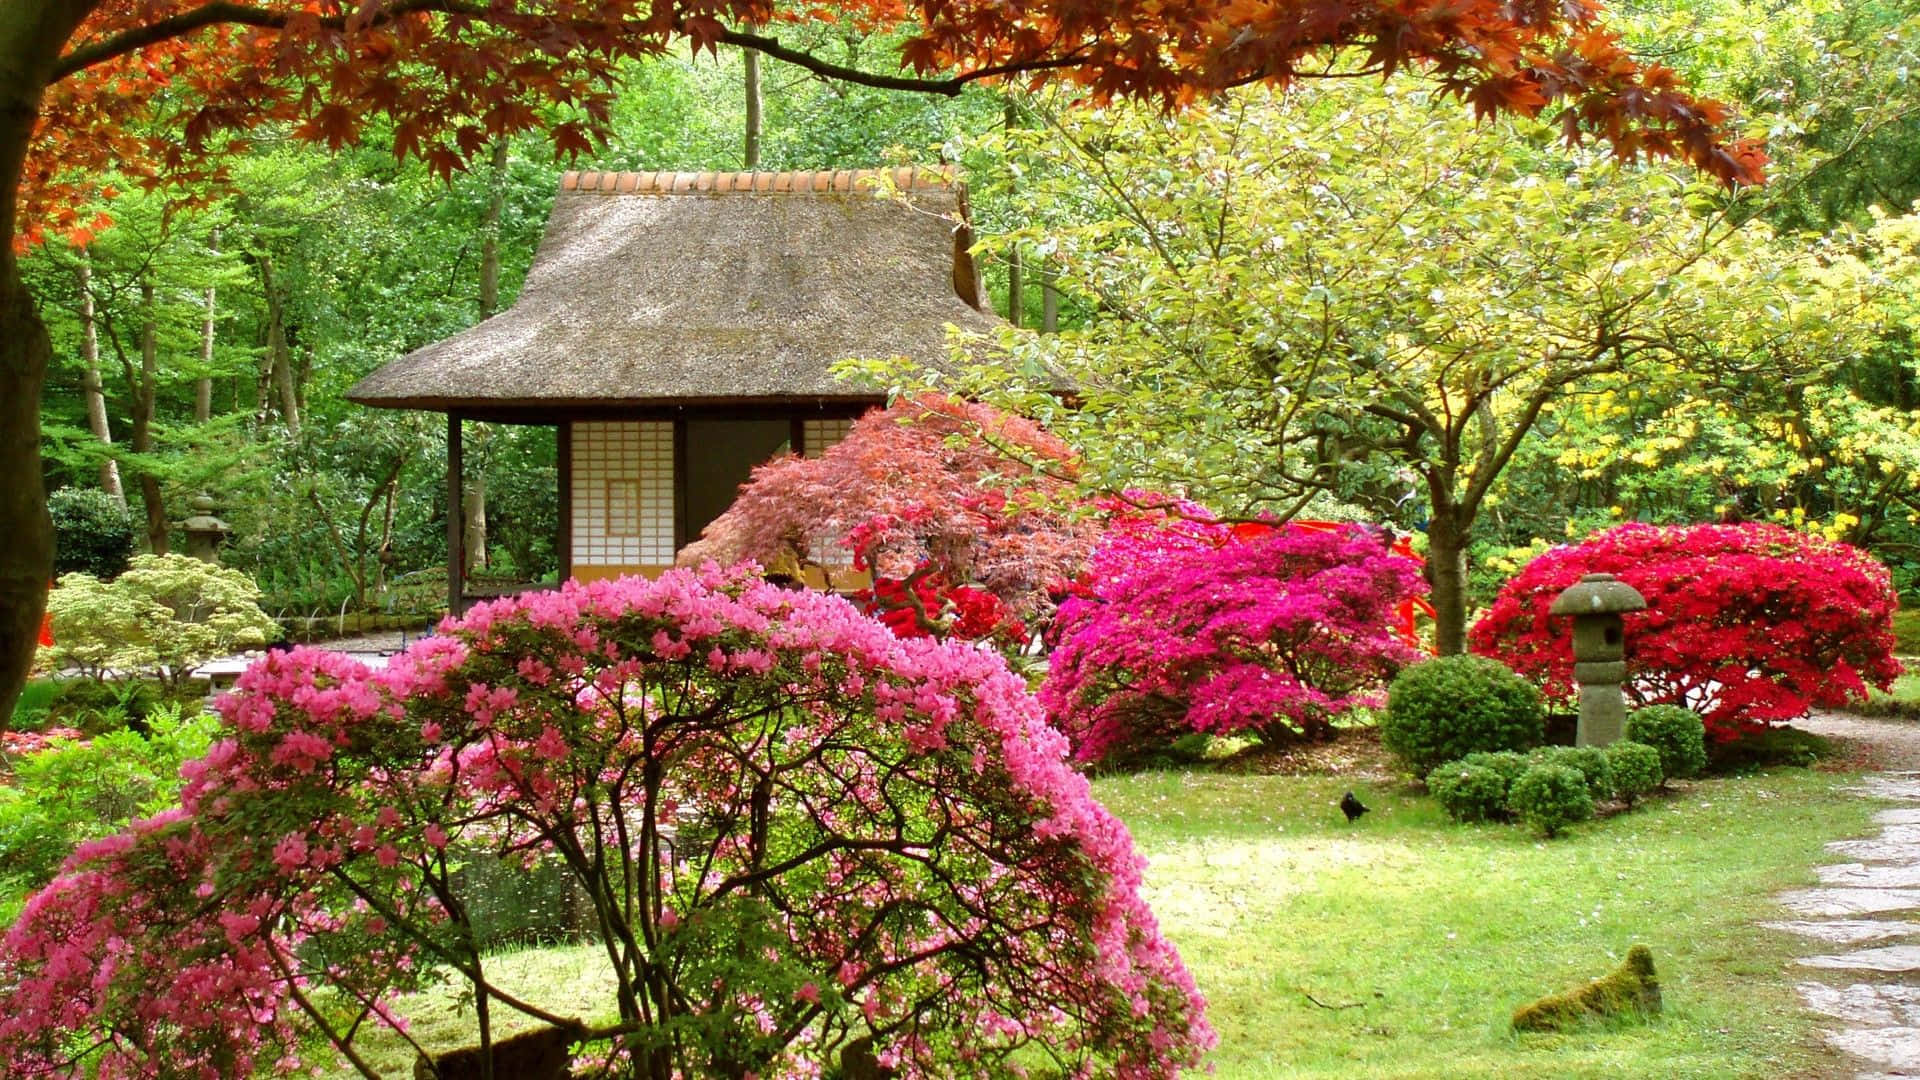 A Japanese Garden With Colorful Flowers And Trees